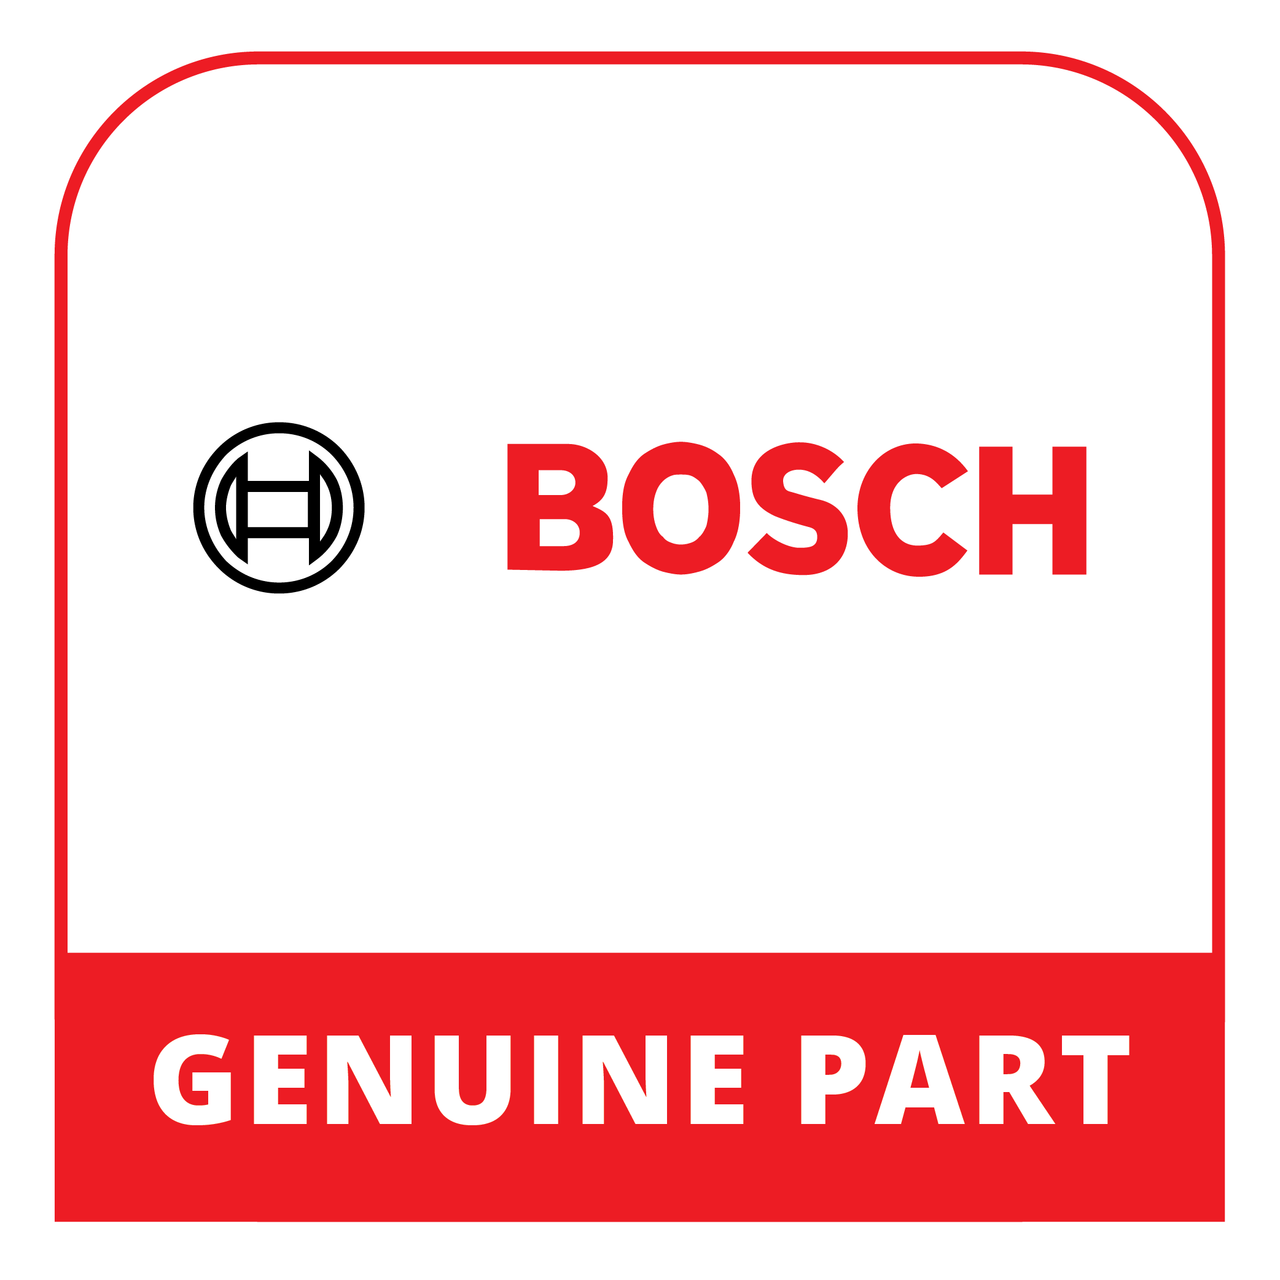 Bosch (Thermador) 00613959 - Sealing - Genuine Bosch (Thermador) Part